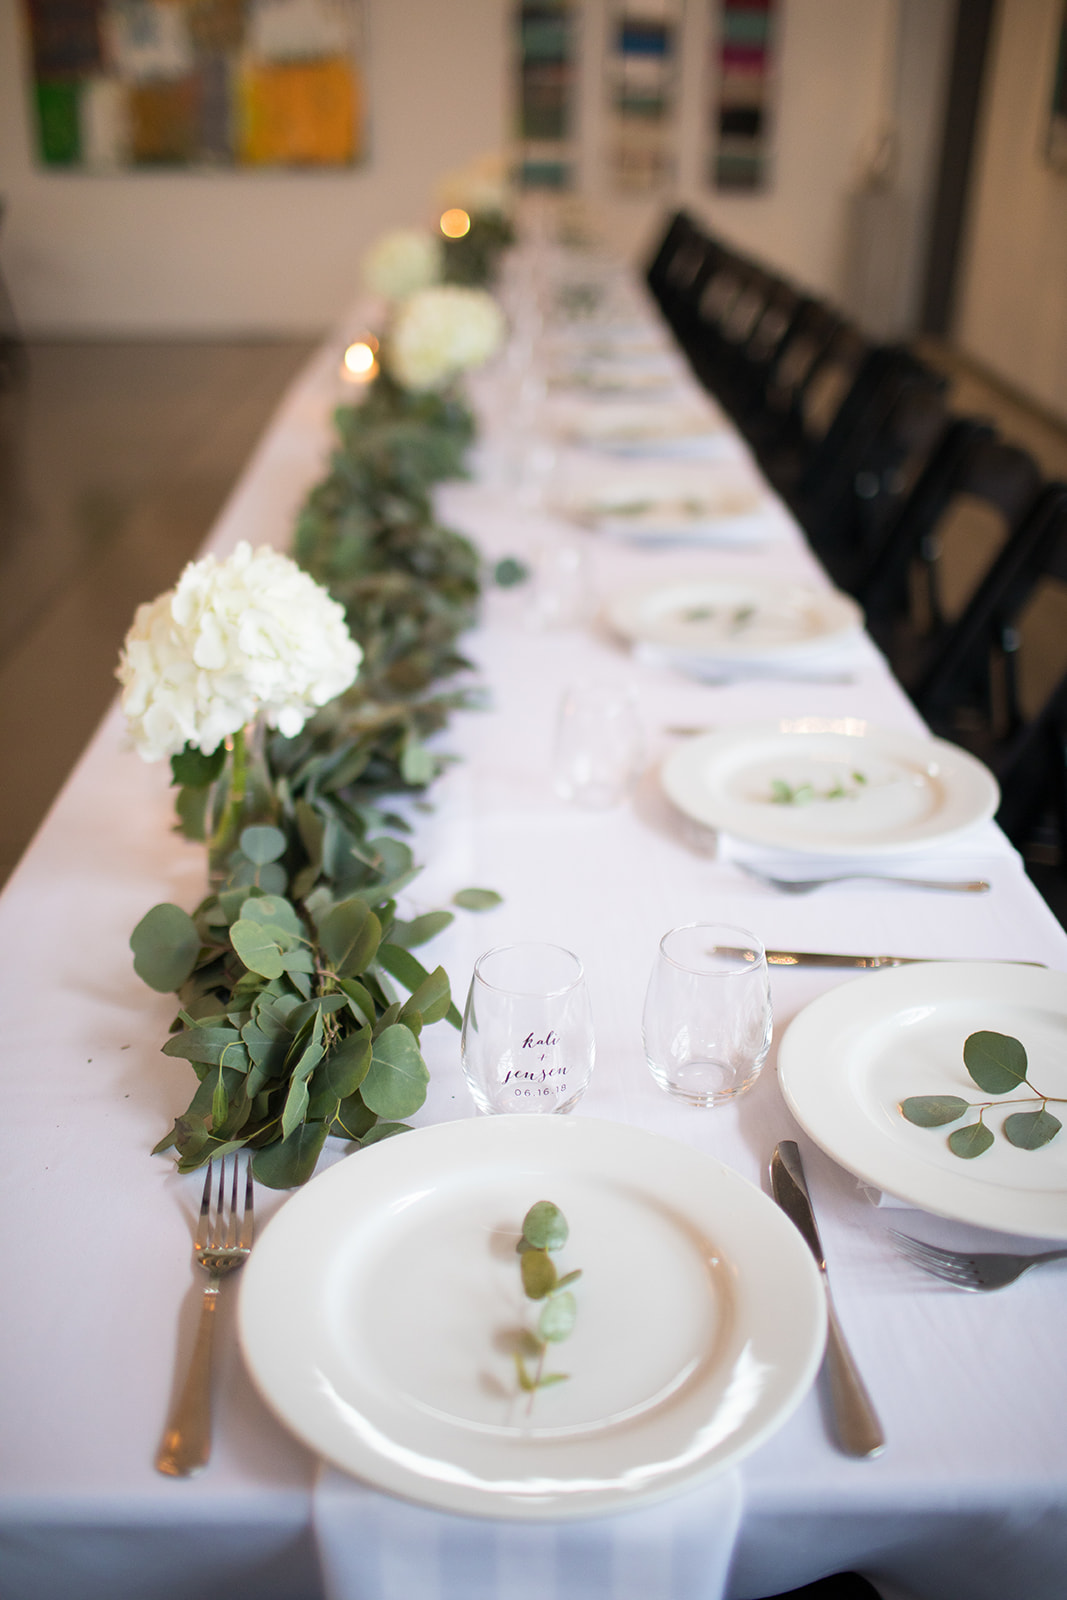 long table with garland and table settings at wedding reception